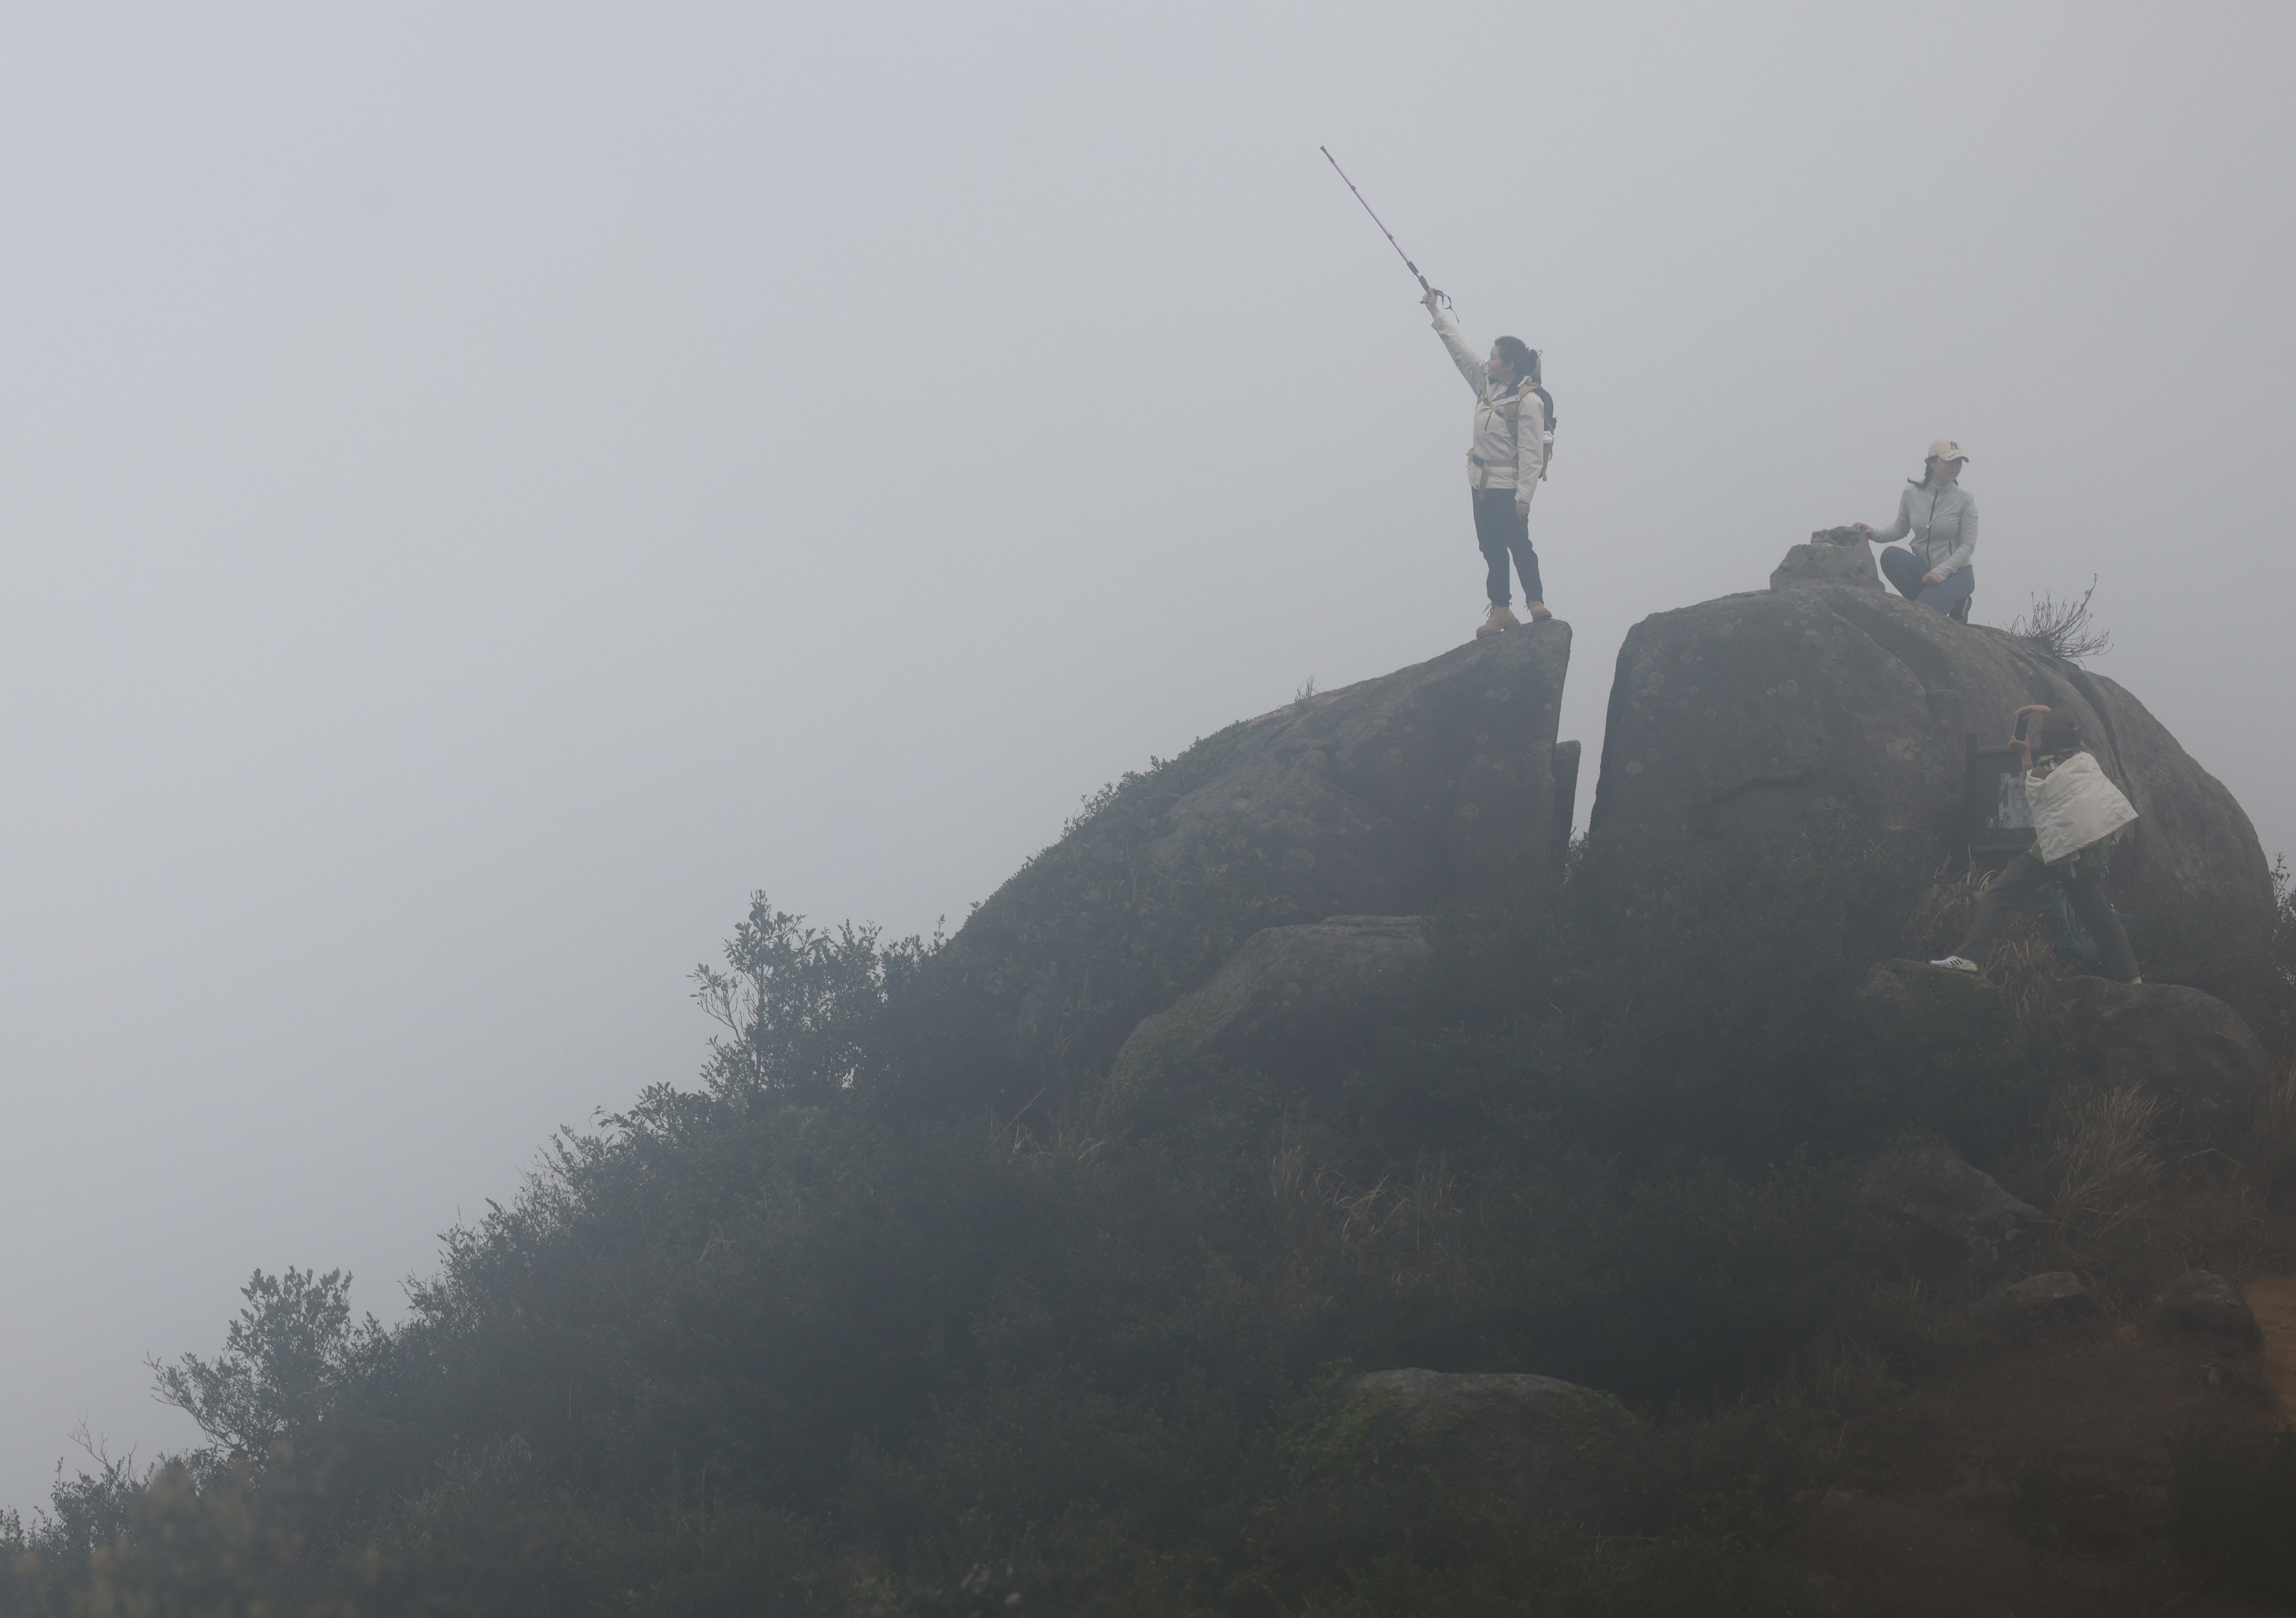 A visitor is seen on Tai Mo Shan, the highest mountain in Hong Kong, 957 meters (3,100 feet) above sea level. Photo: Dickson Lee